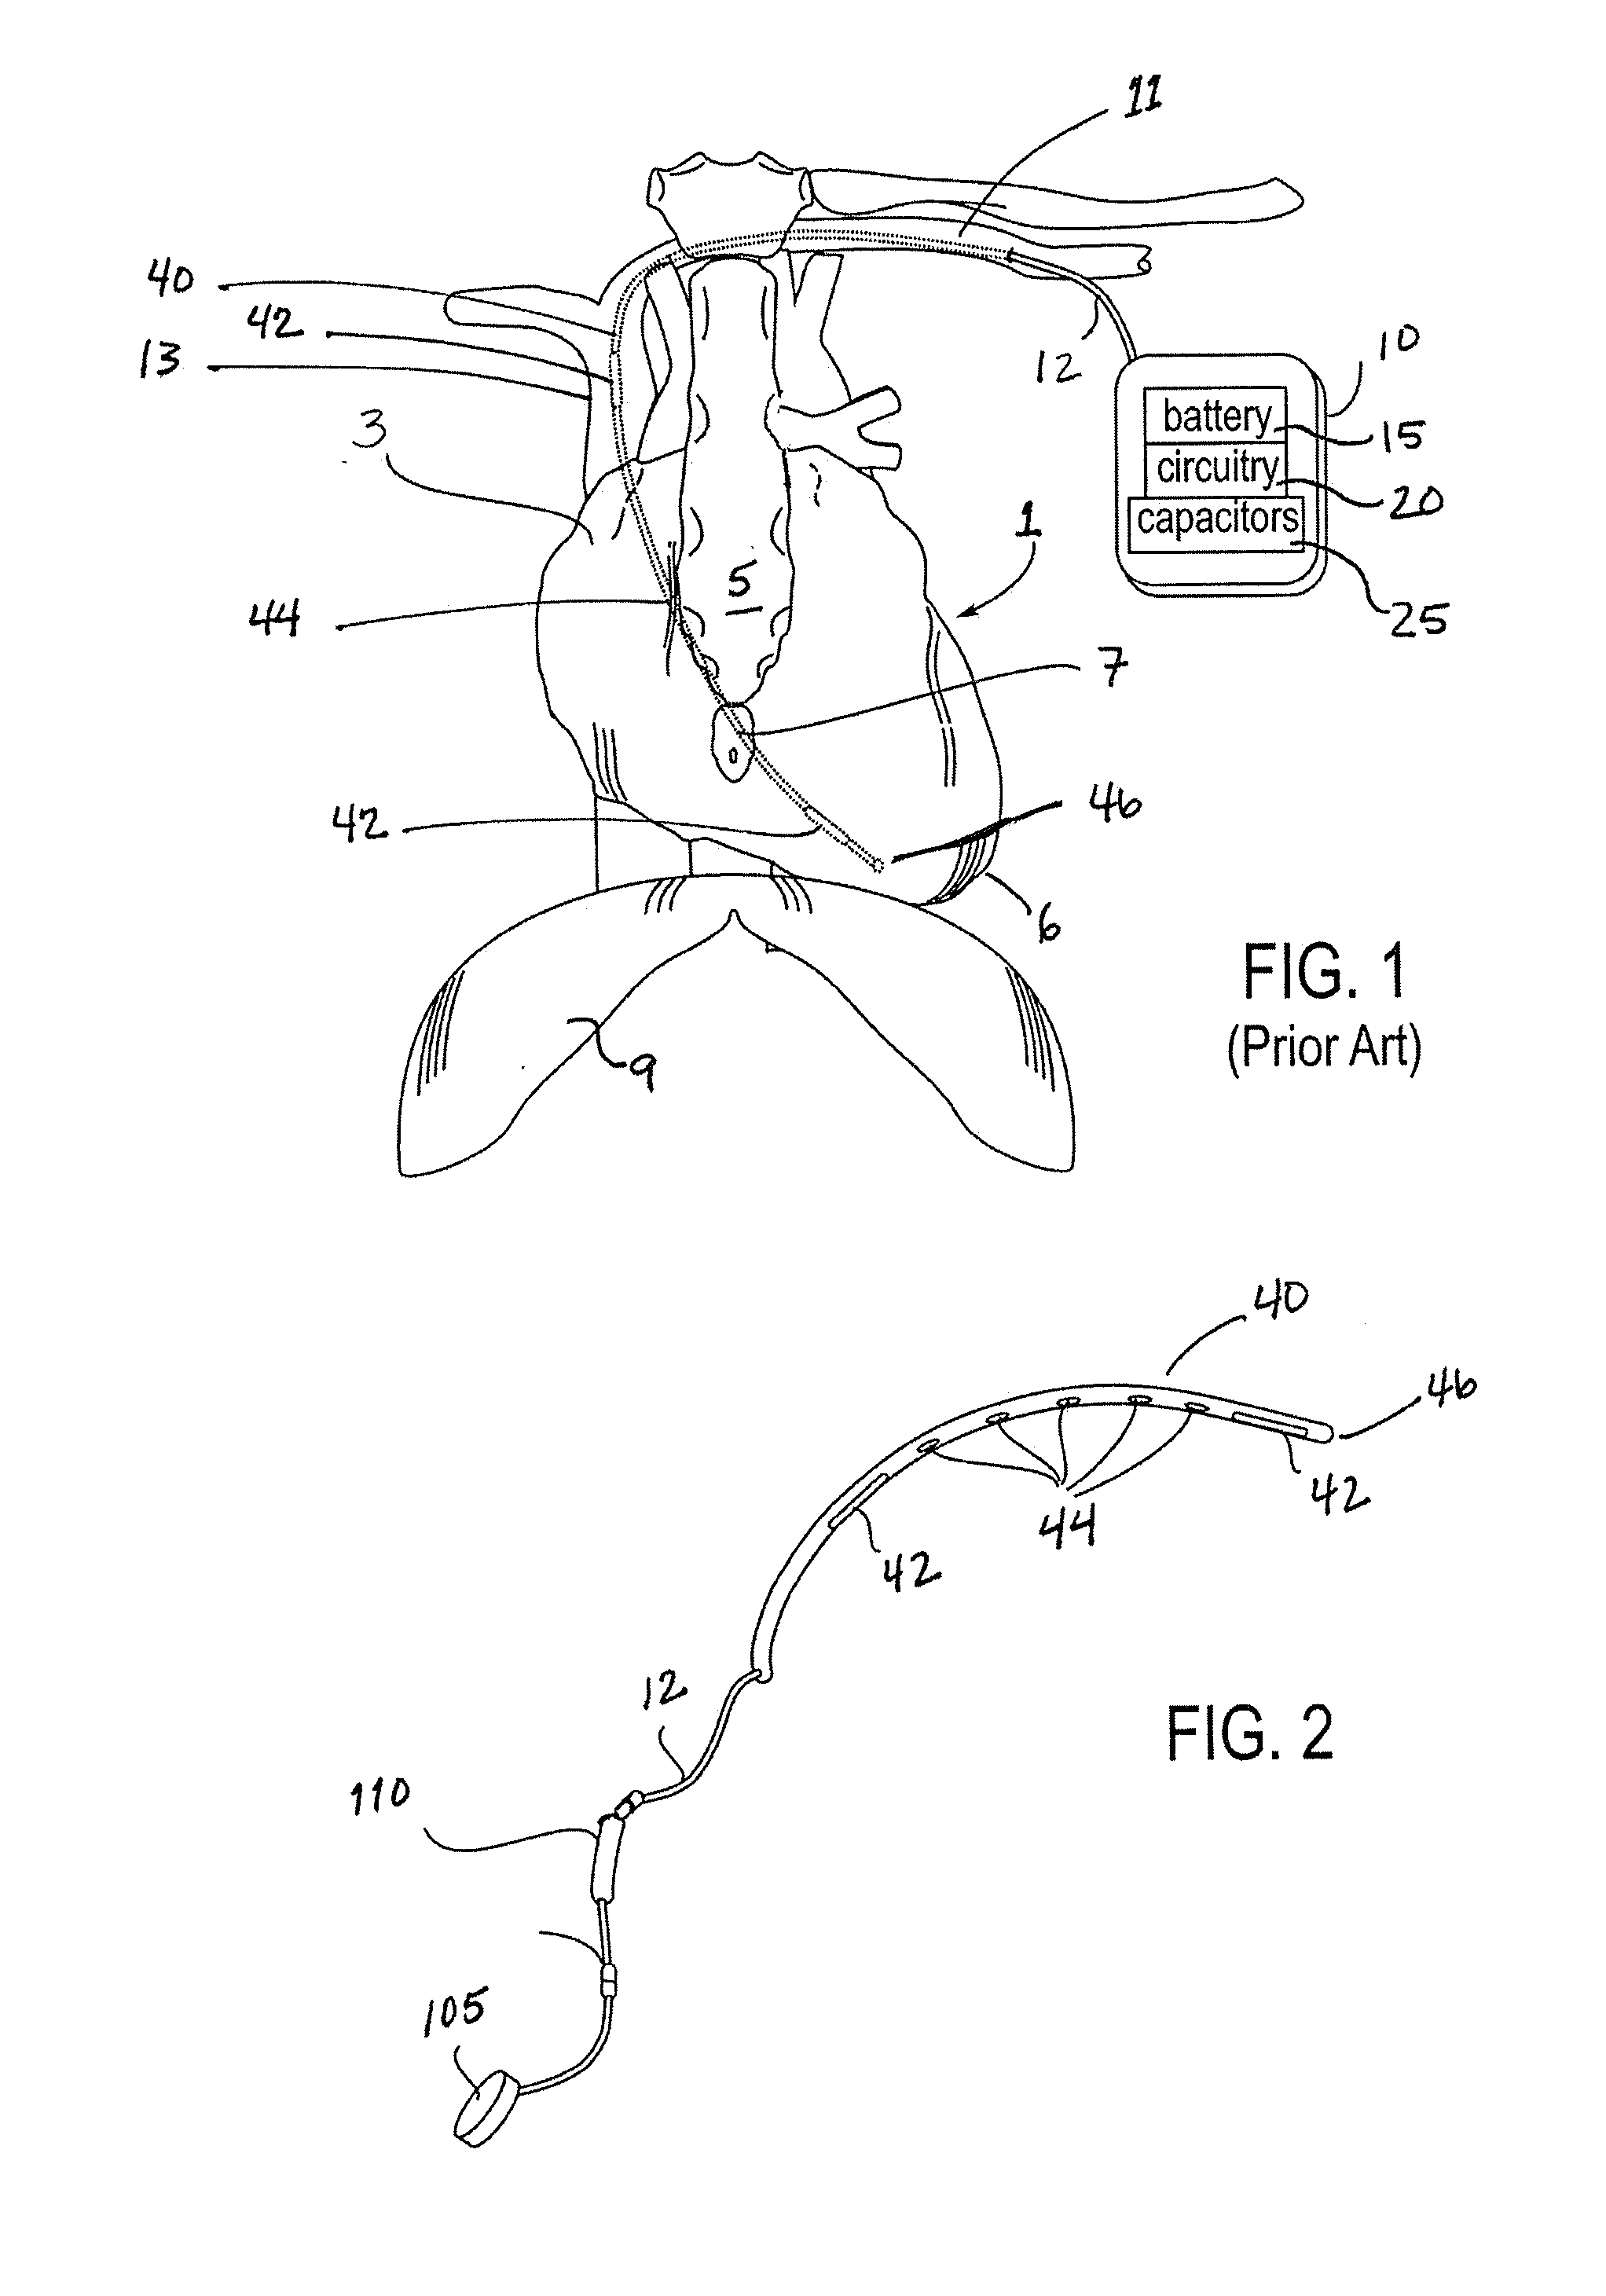 Implanted cardiac device for defibrillation